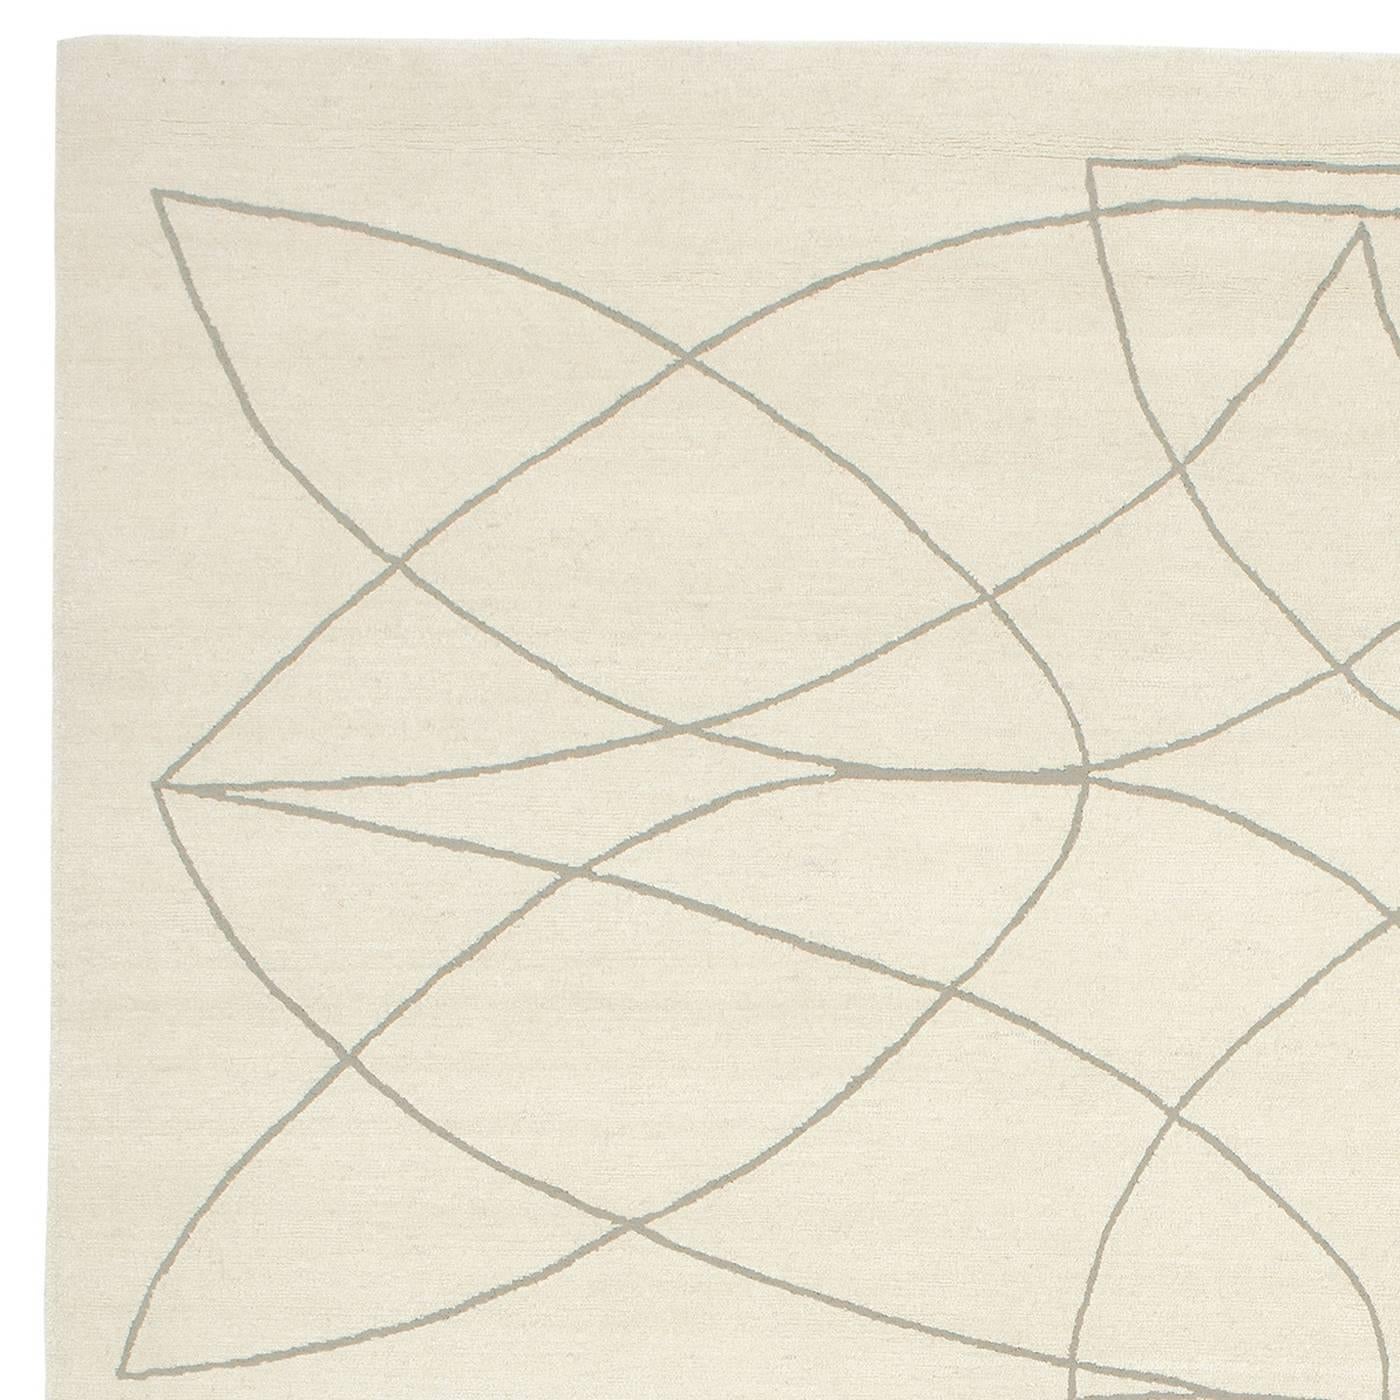 This exquisite 100-knot rug was knotted entirely by hand in Nepal using wool and bamboo silk. The natural white background is adorned with fine, elongated curves in grey that cross each other creating an elegant wool pattern that will enrich any